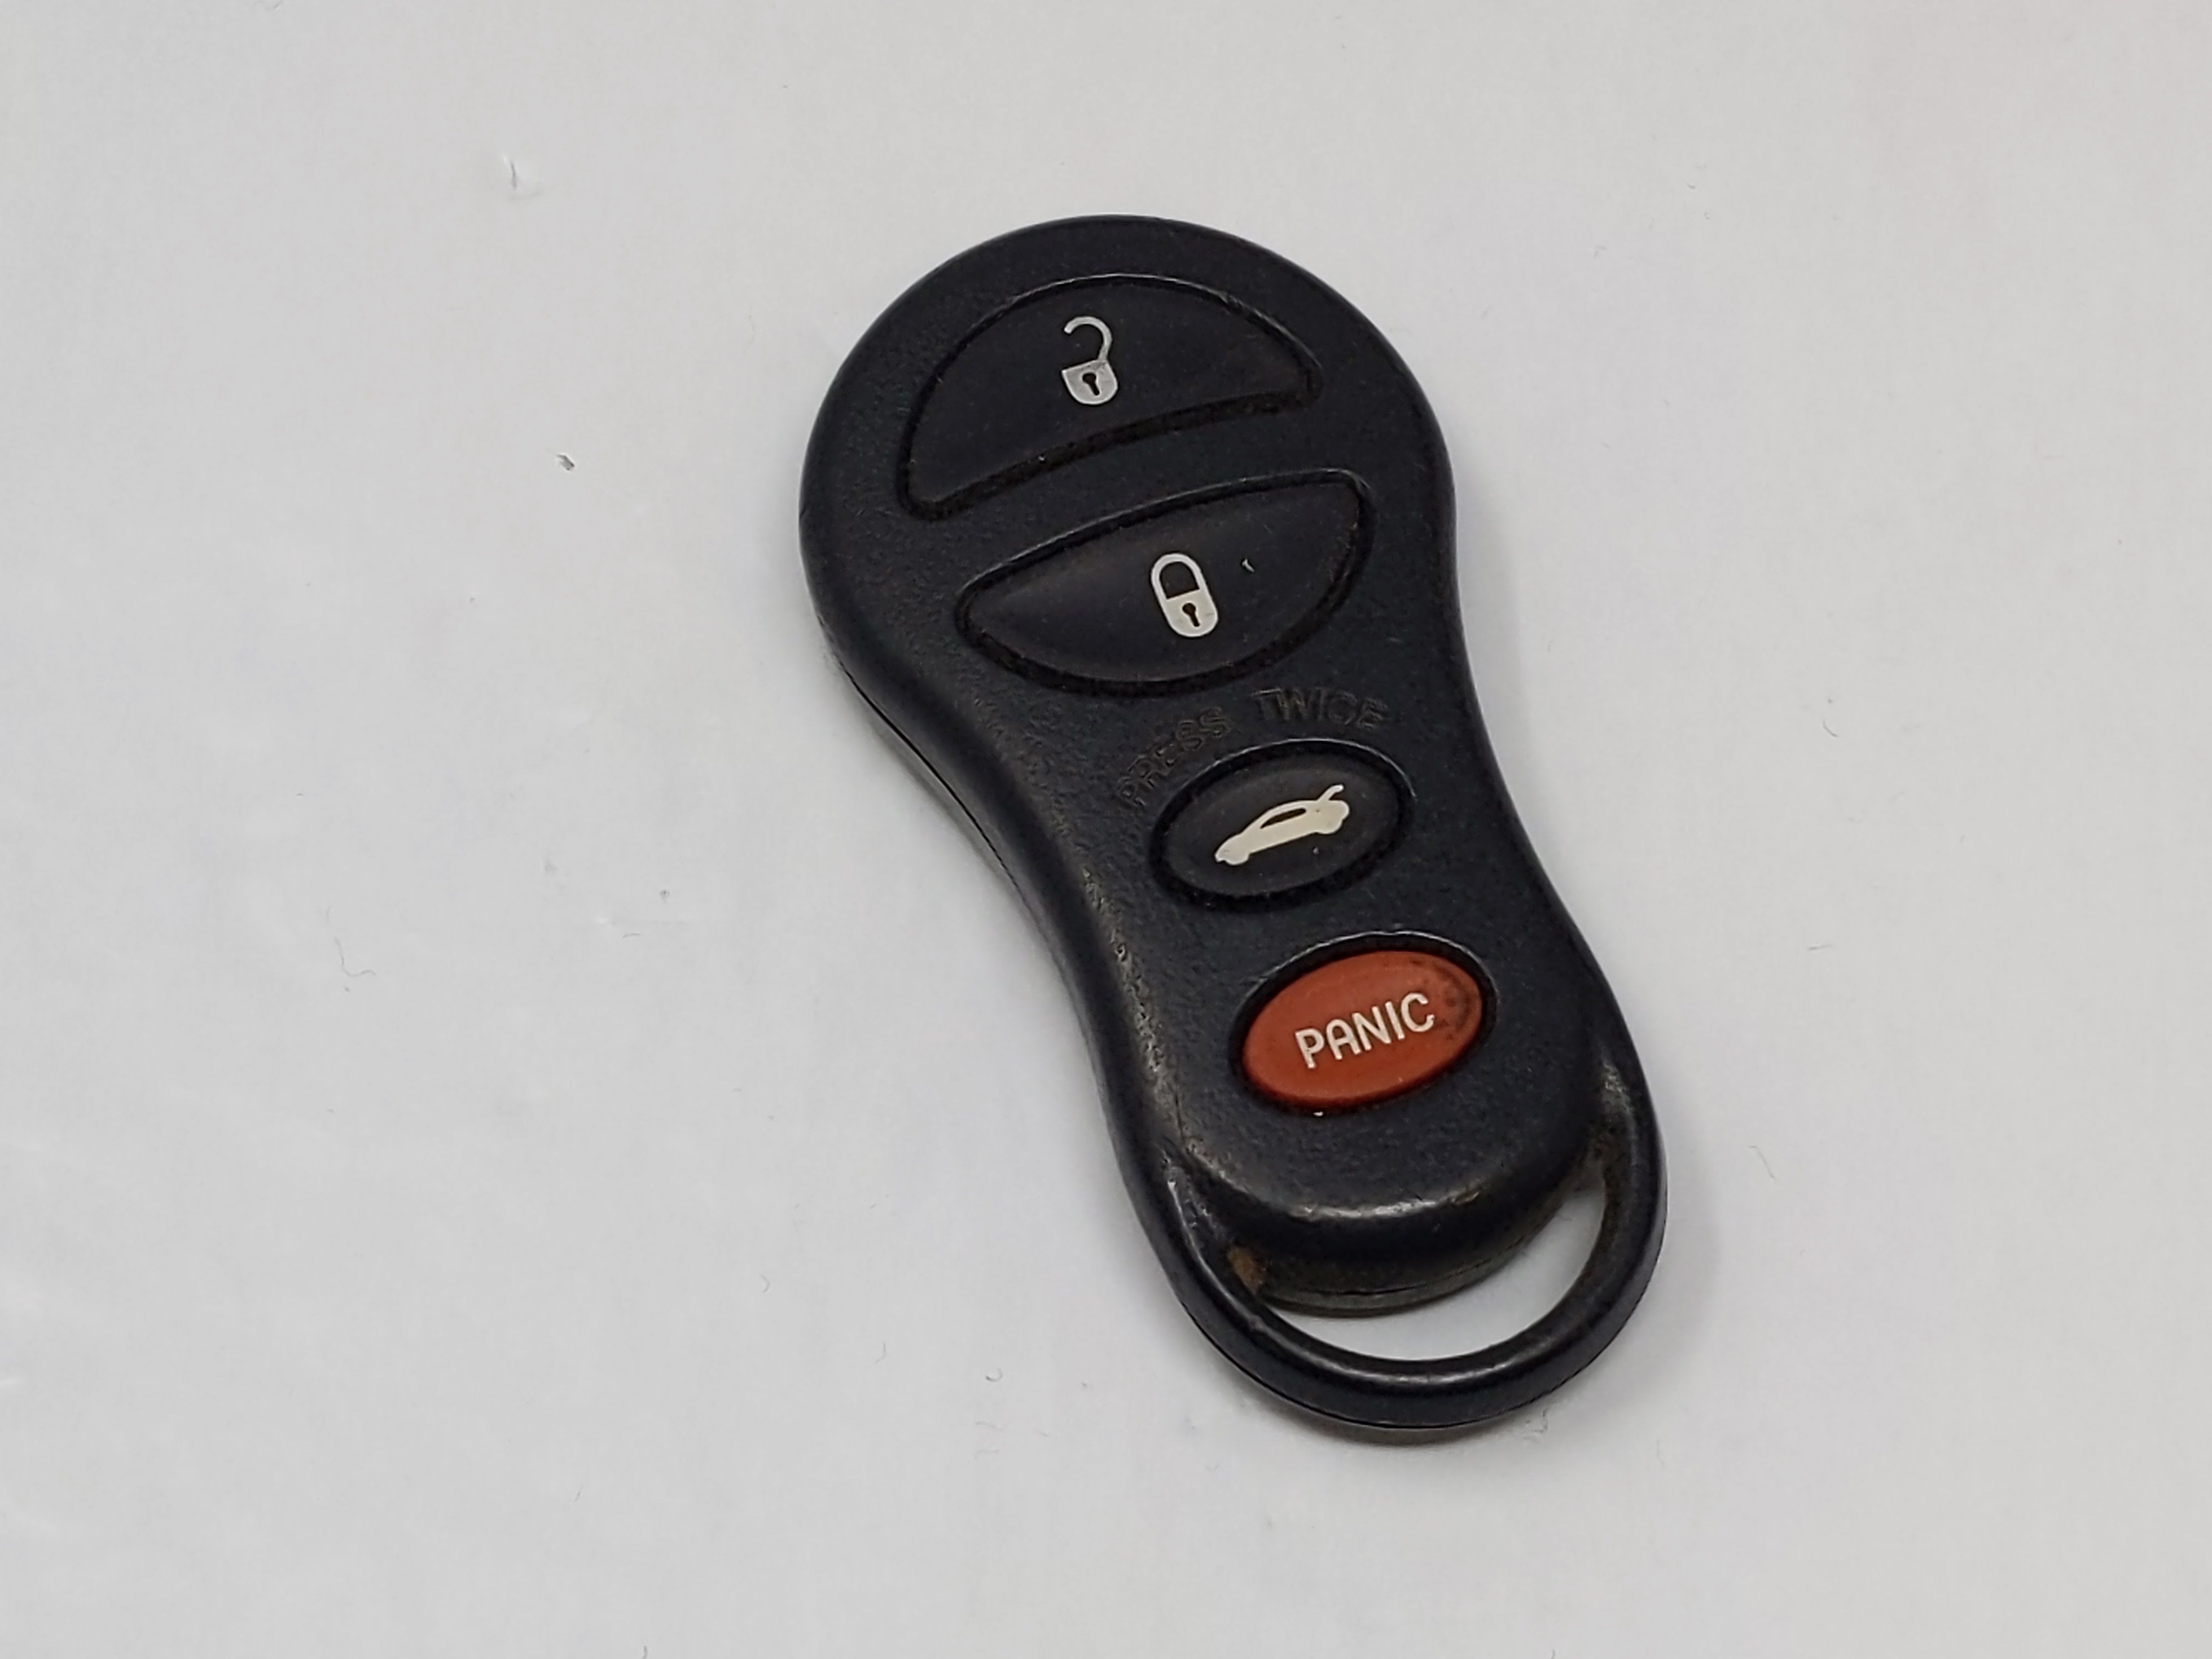 Chrysler Neon Keyless Entry Remote Fob Gq43vt9t 04759008af 4 Buttons - Oemusedautoparts1.com